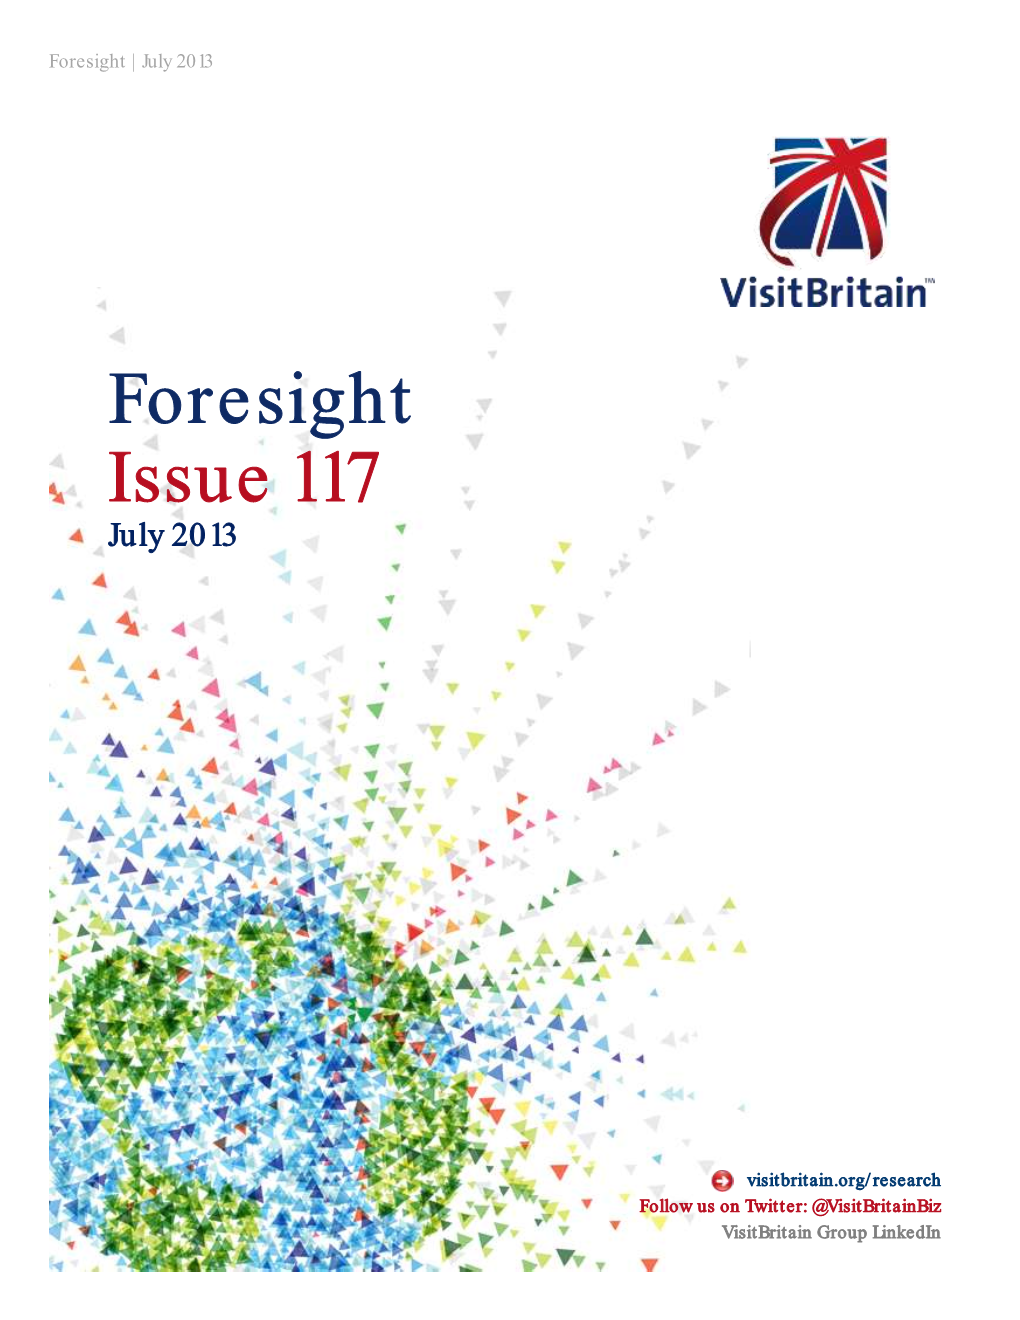 Foresight Issue 117 July 2013